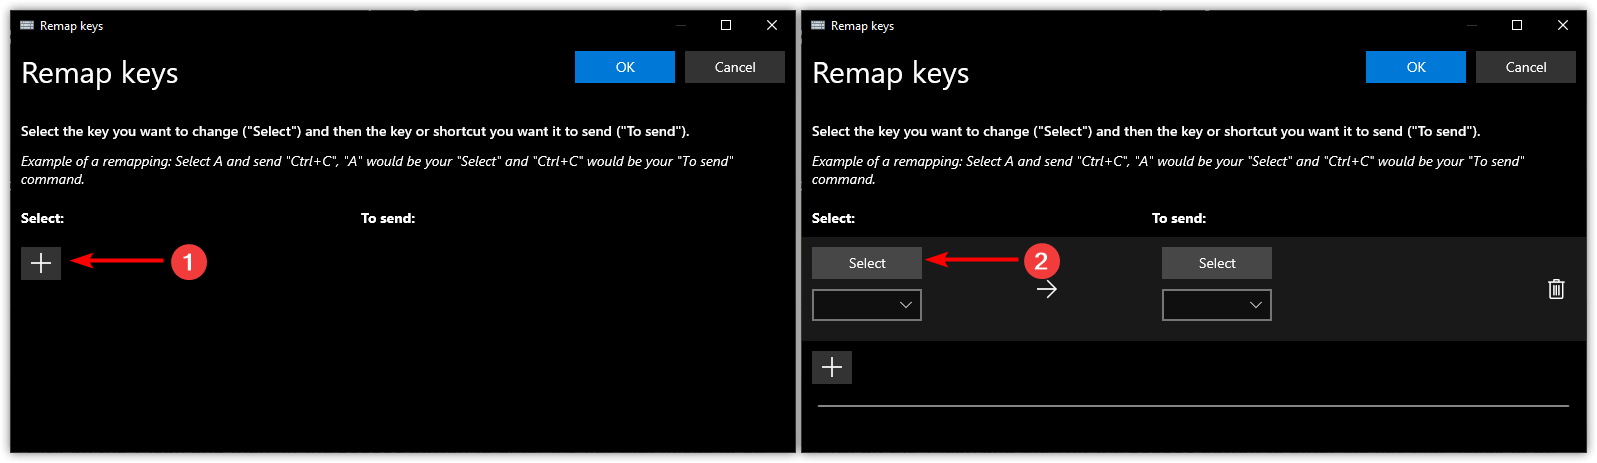 How to remap keys in Windows